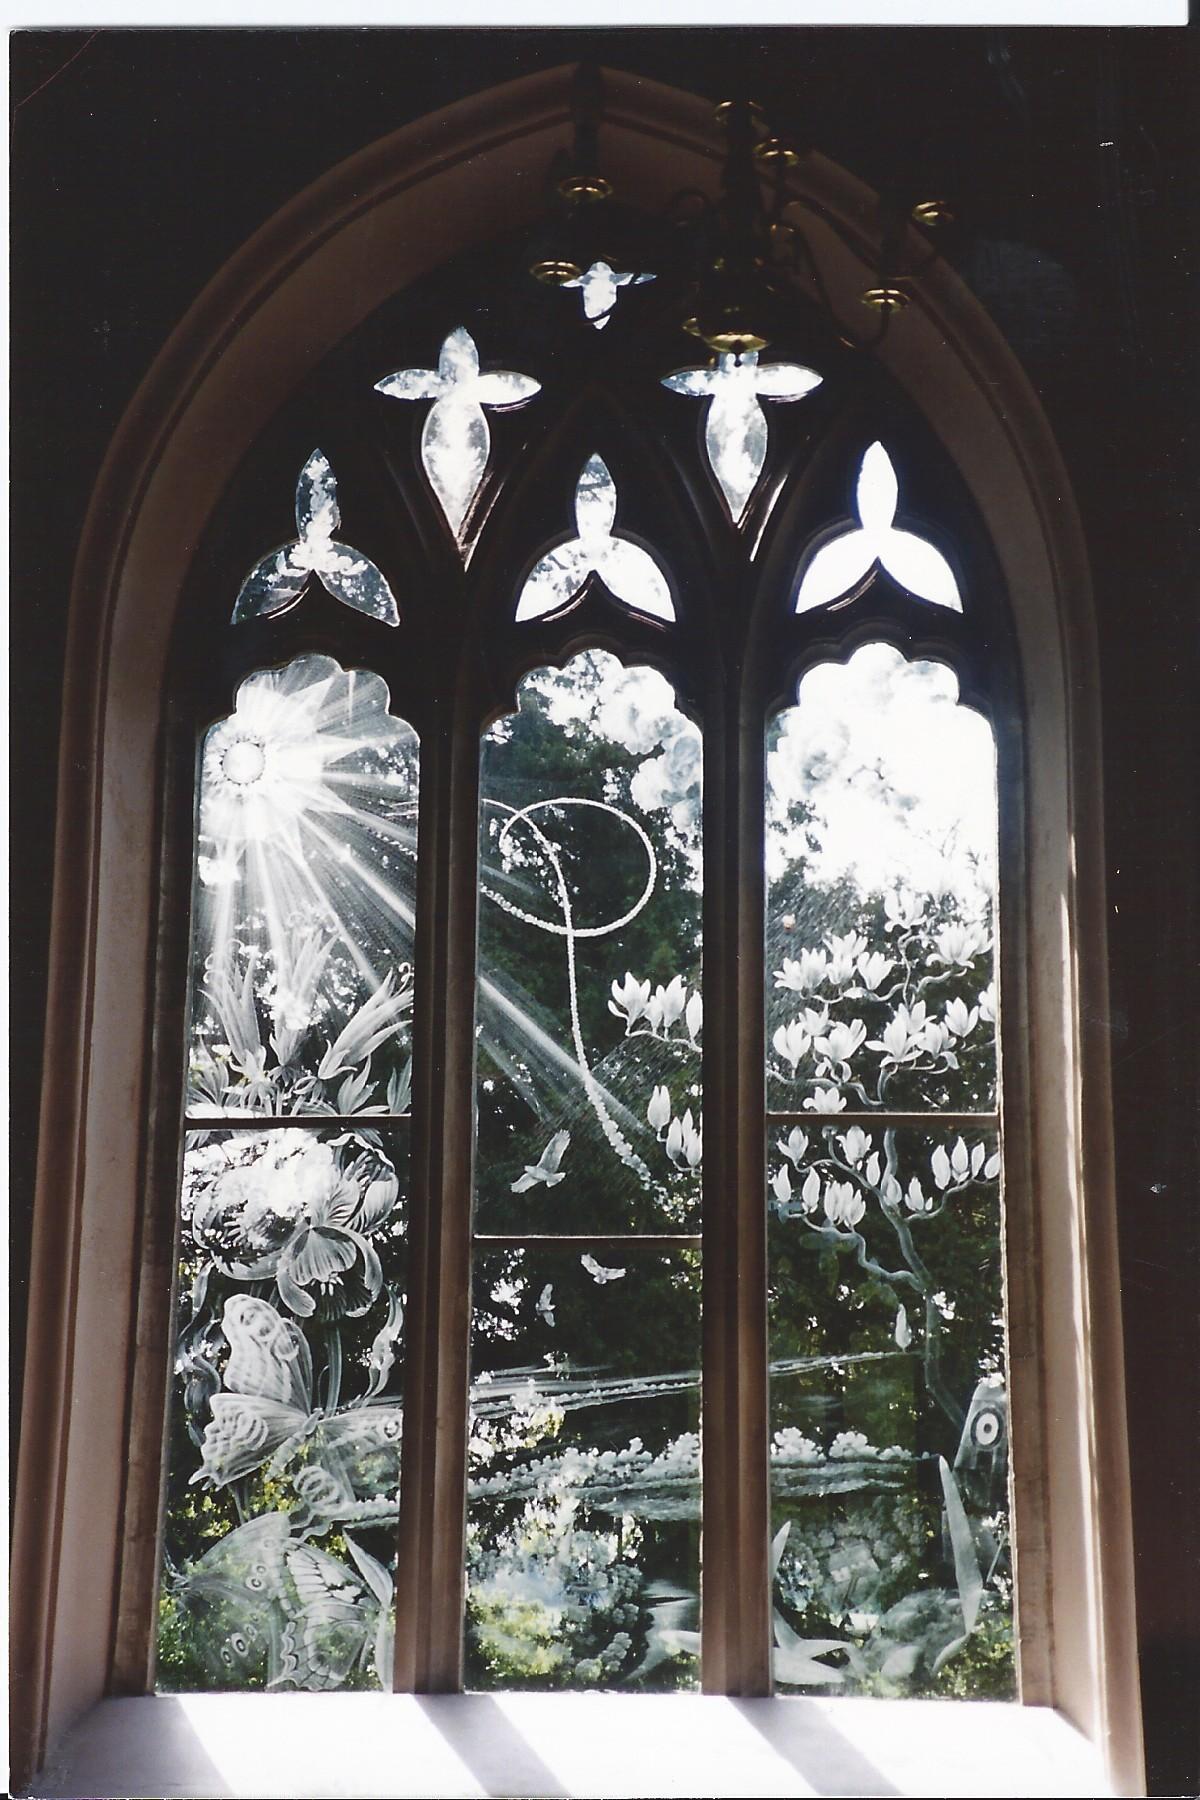 Moreton church and one of the beautiful windows by Annie Chambers